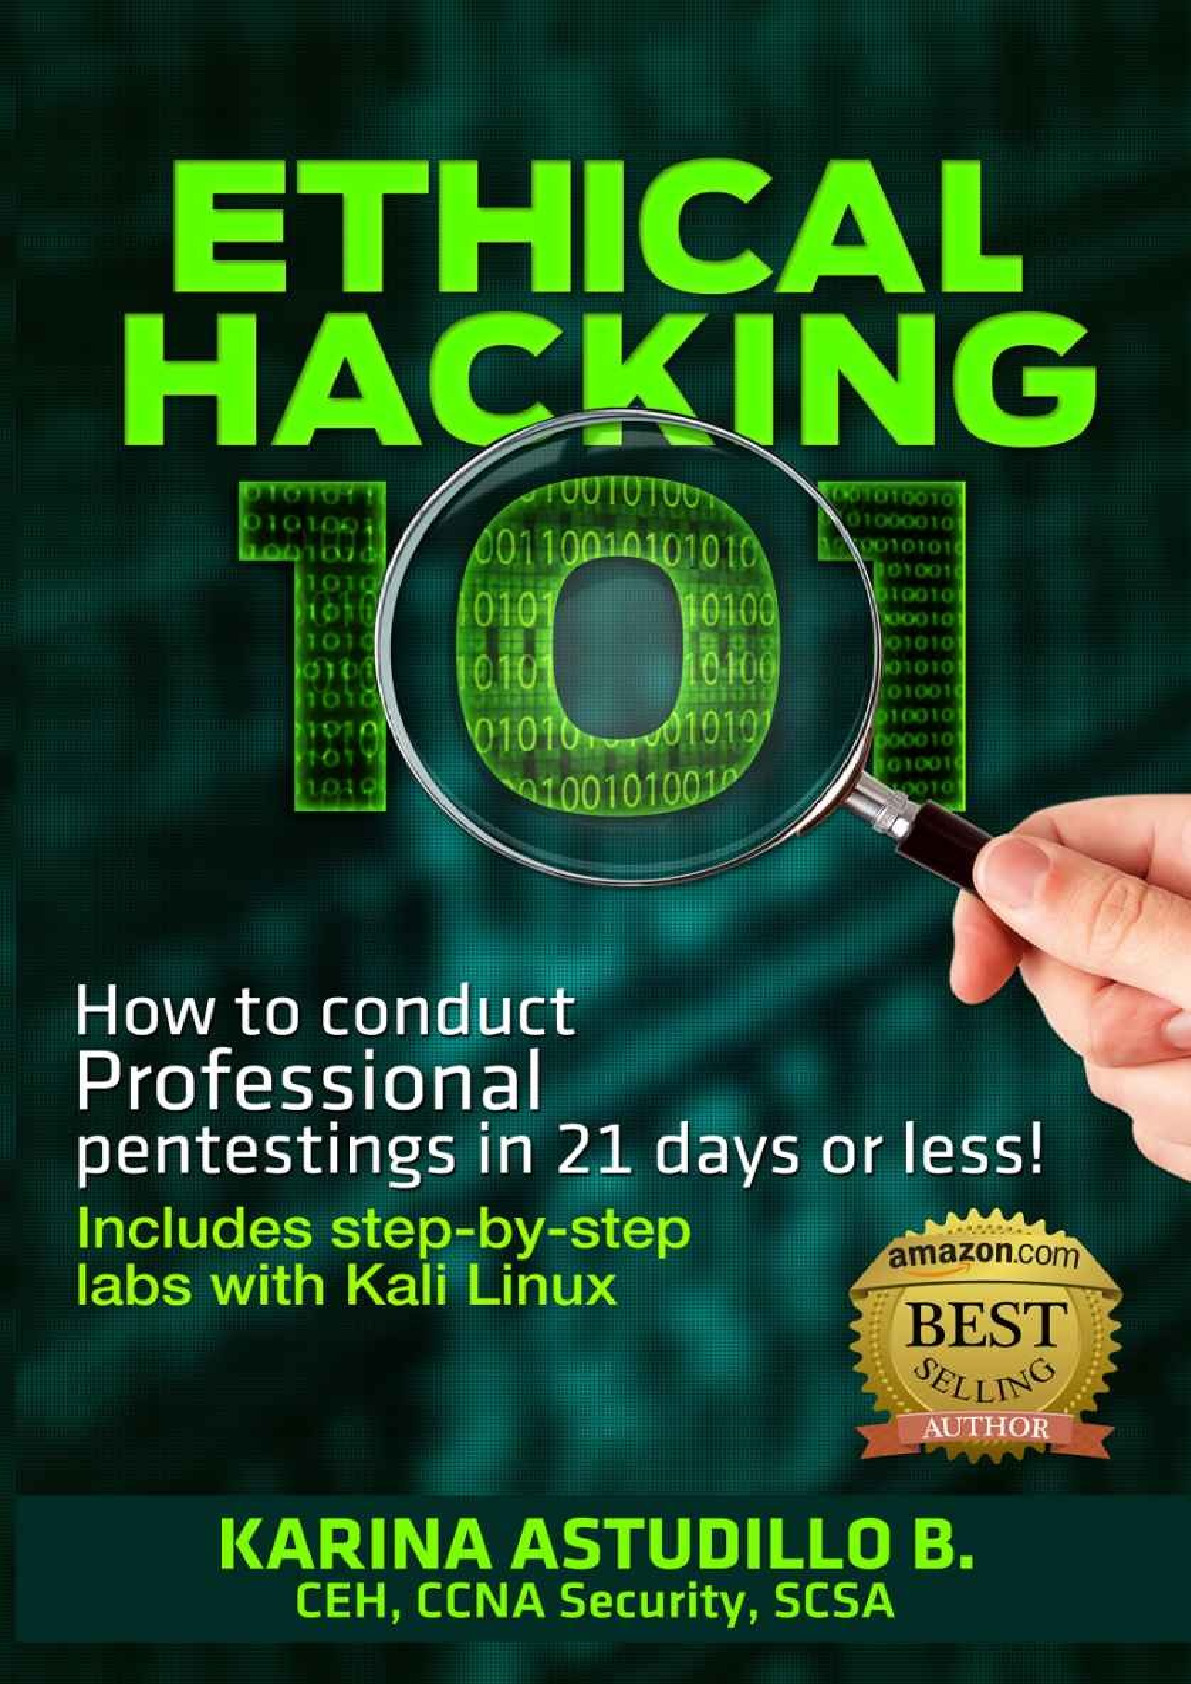 ETHICAL HACKING 101